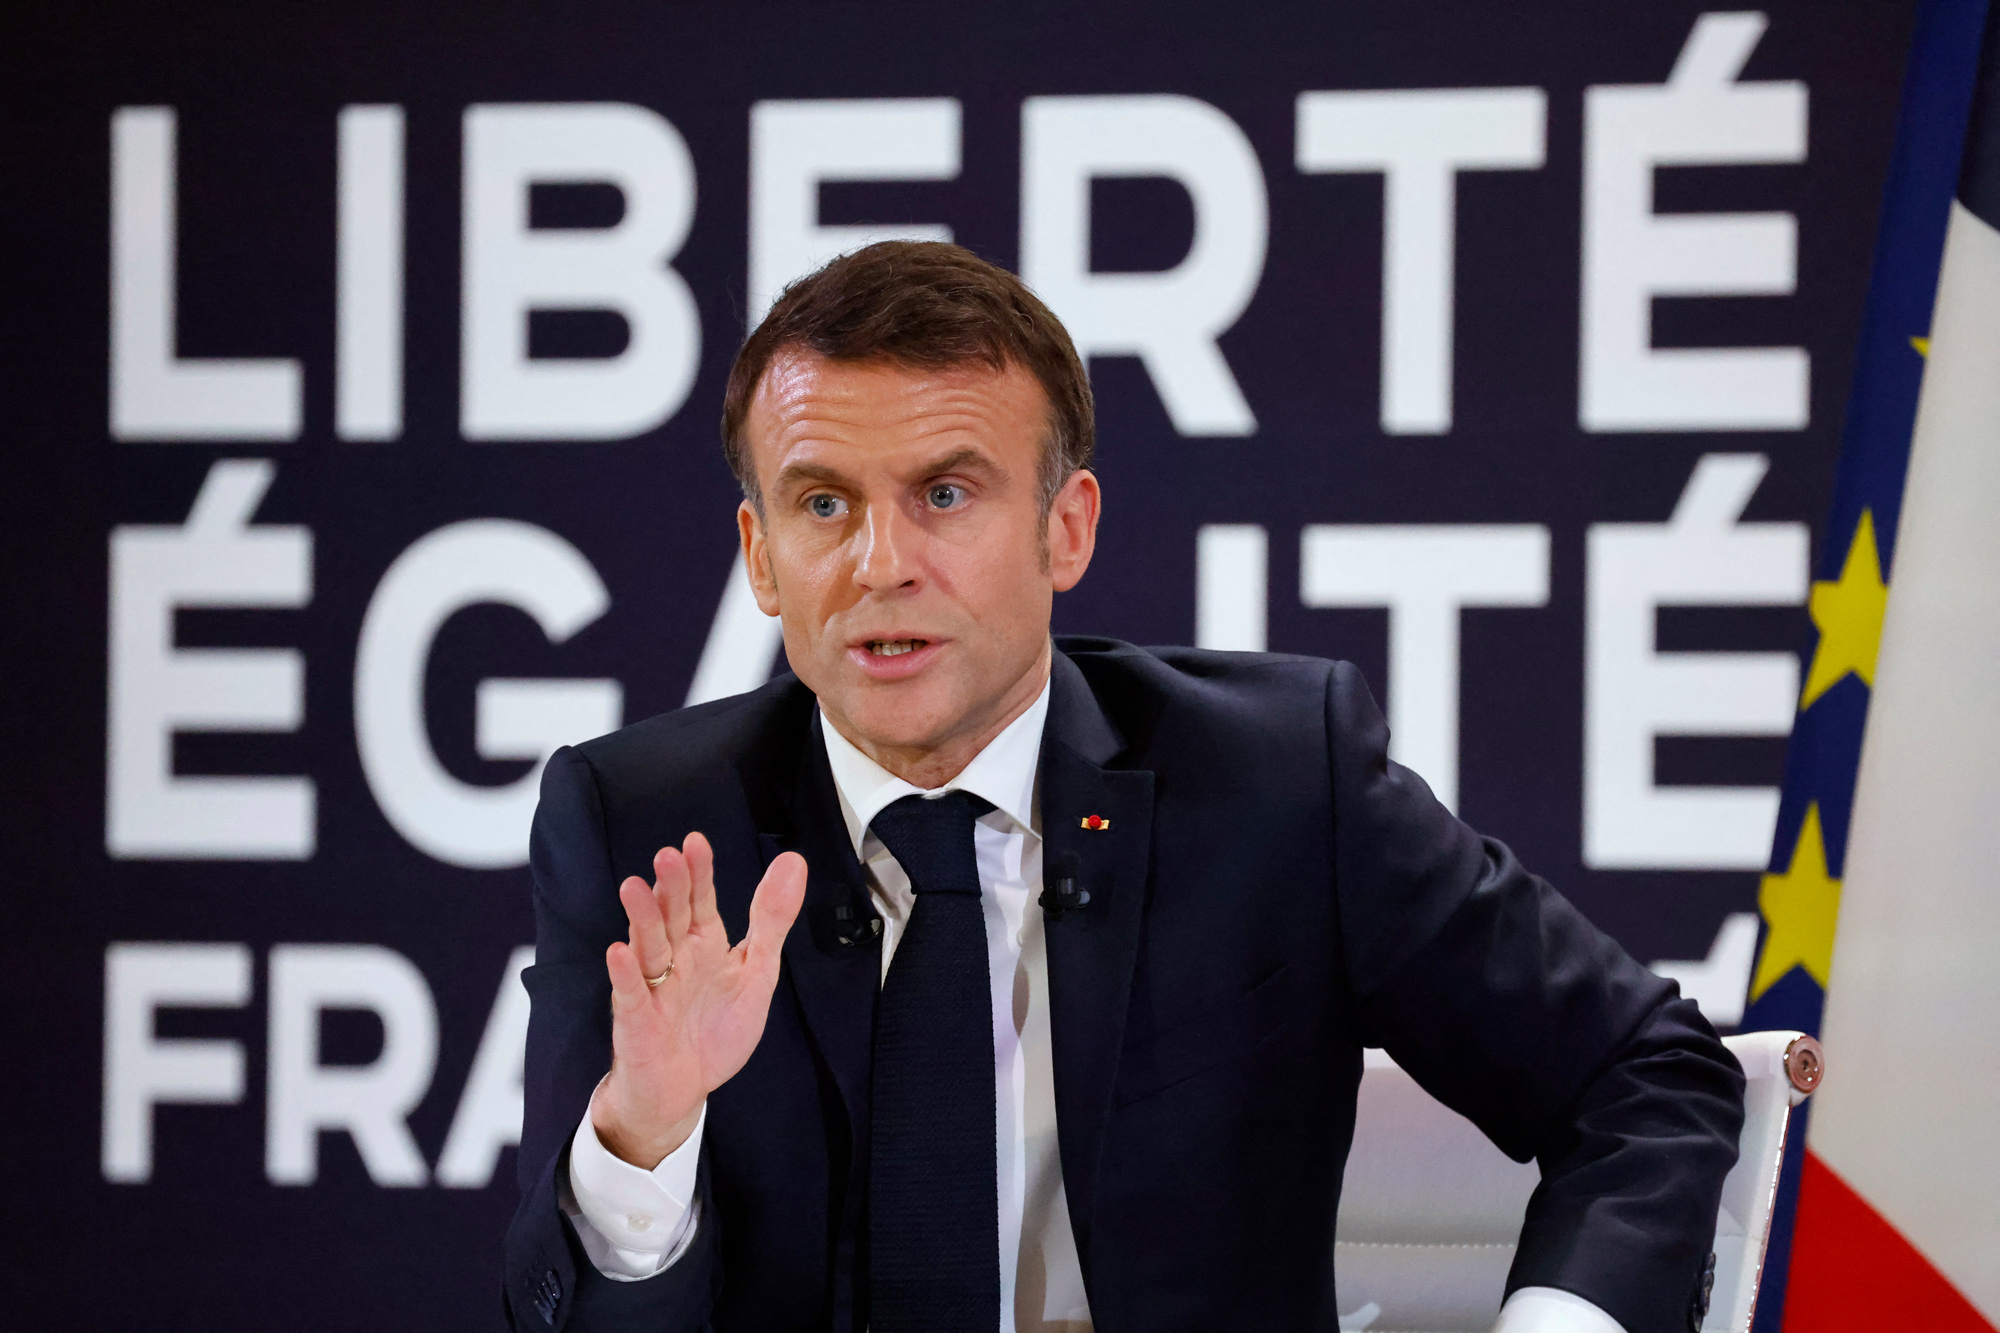 France's President Emmanuel Macron gestures as he speaks during a press conference to present the course for France's newly appointed government at The Elysee Palace in Paris, France, on January 16.